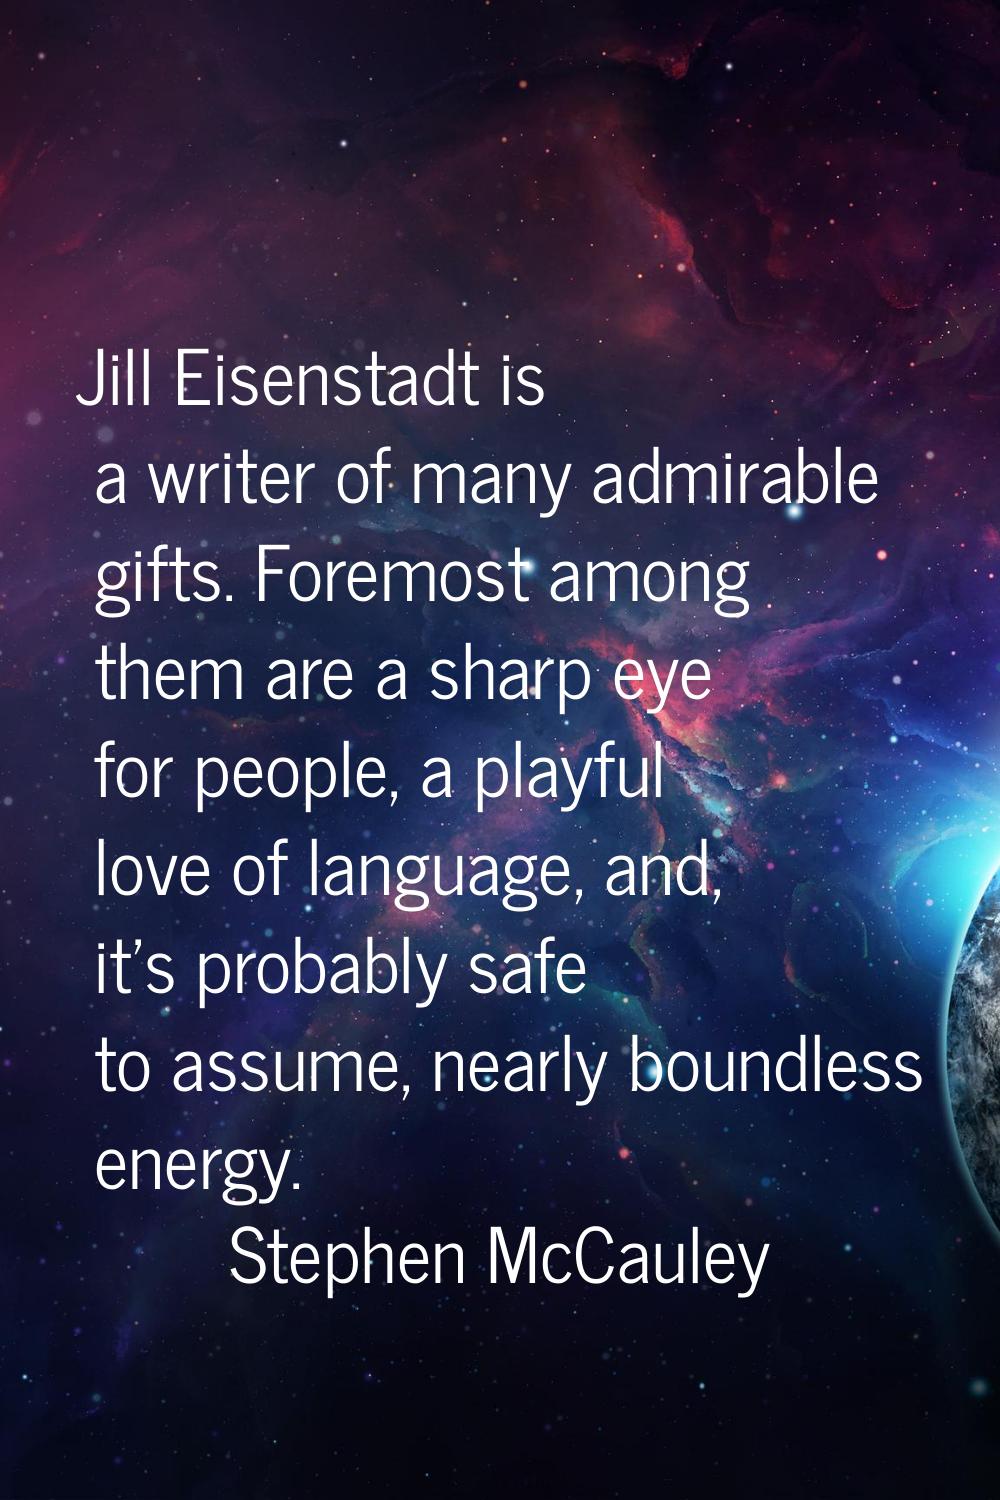 Jill Eisenstadt is a writer of many admirable gifts. Foremost among them are a sharp eye for people